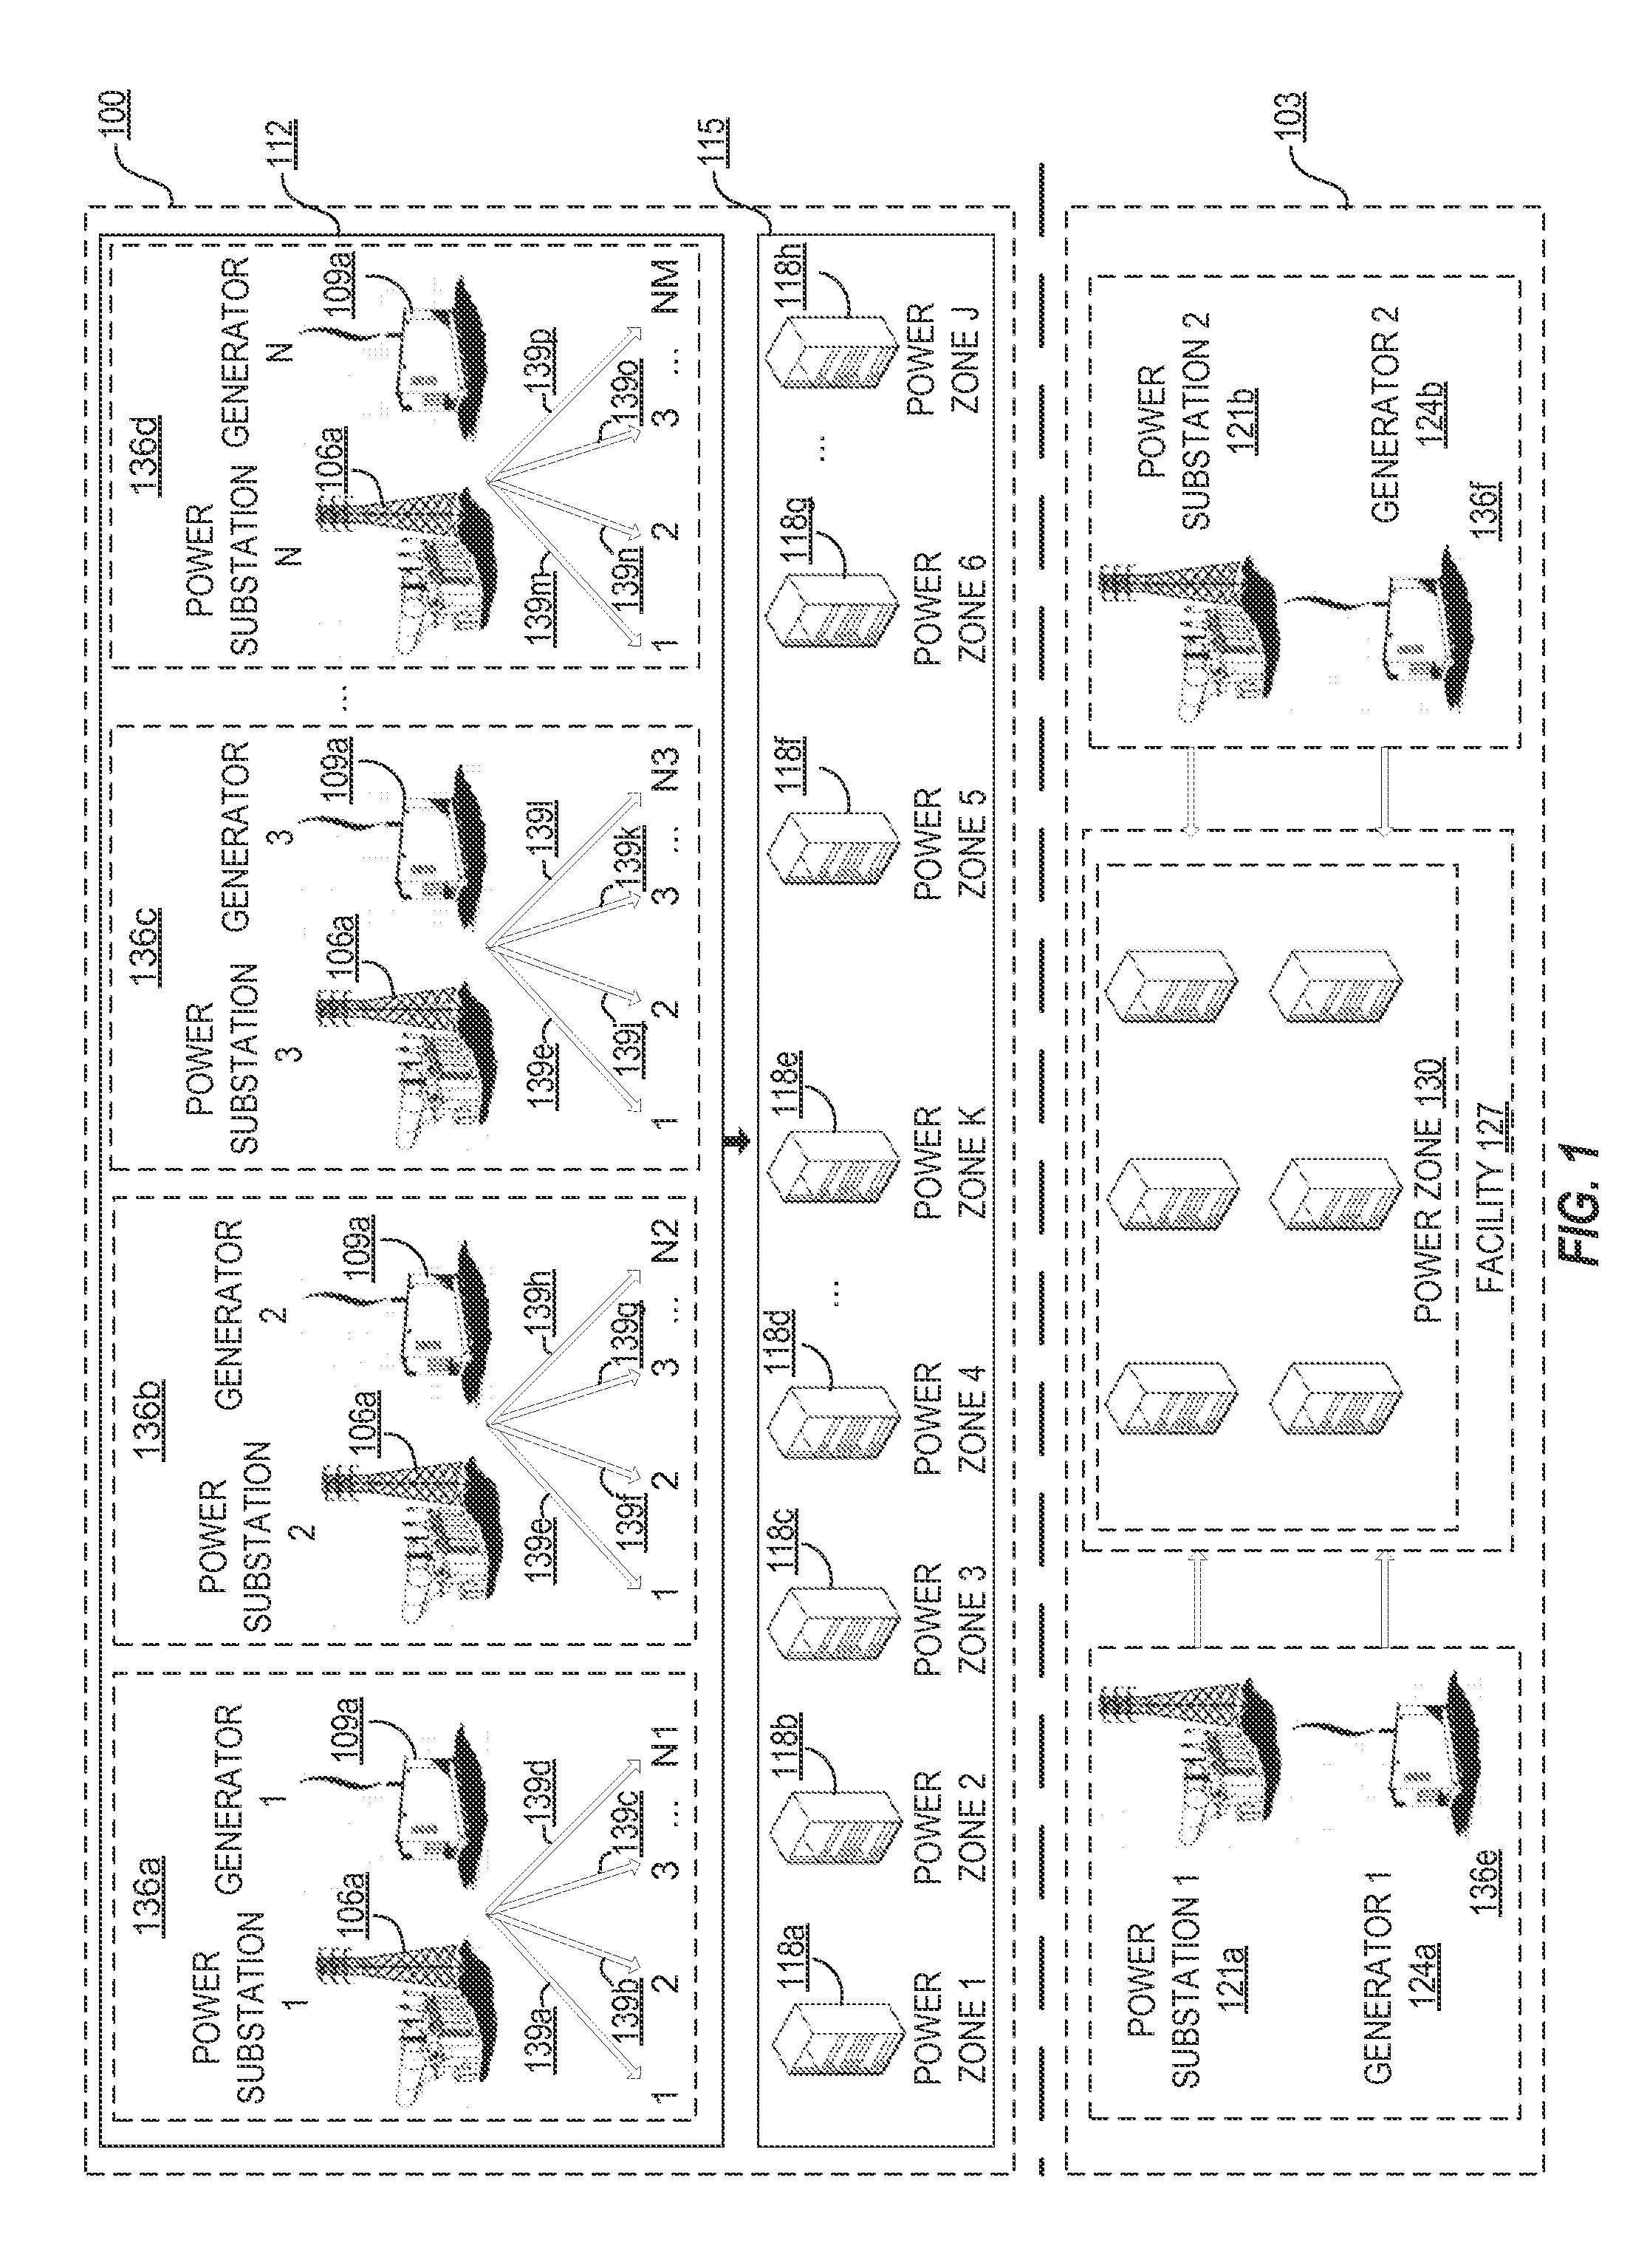 Combinatorial power distribution systems and methods for configuring same